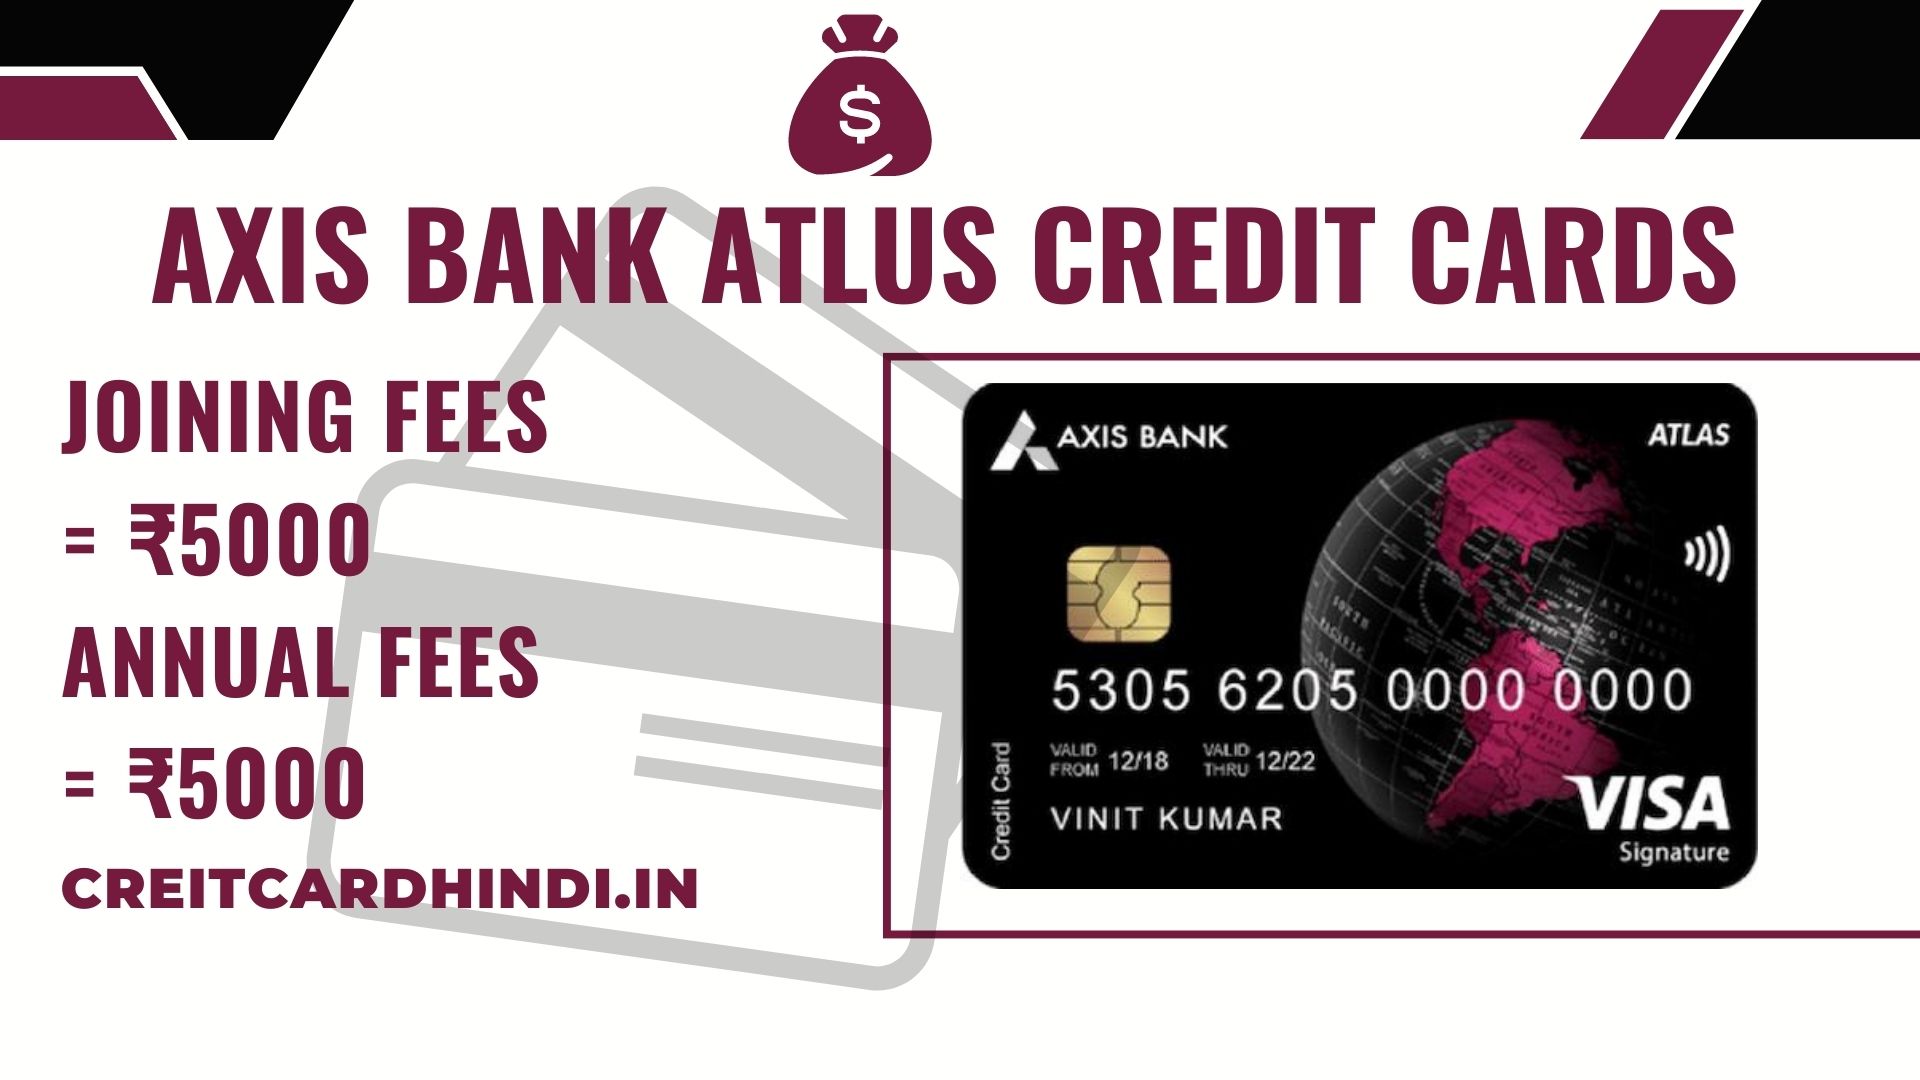 Axis Bank Atlus Credit Card Fees & Charges